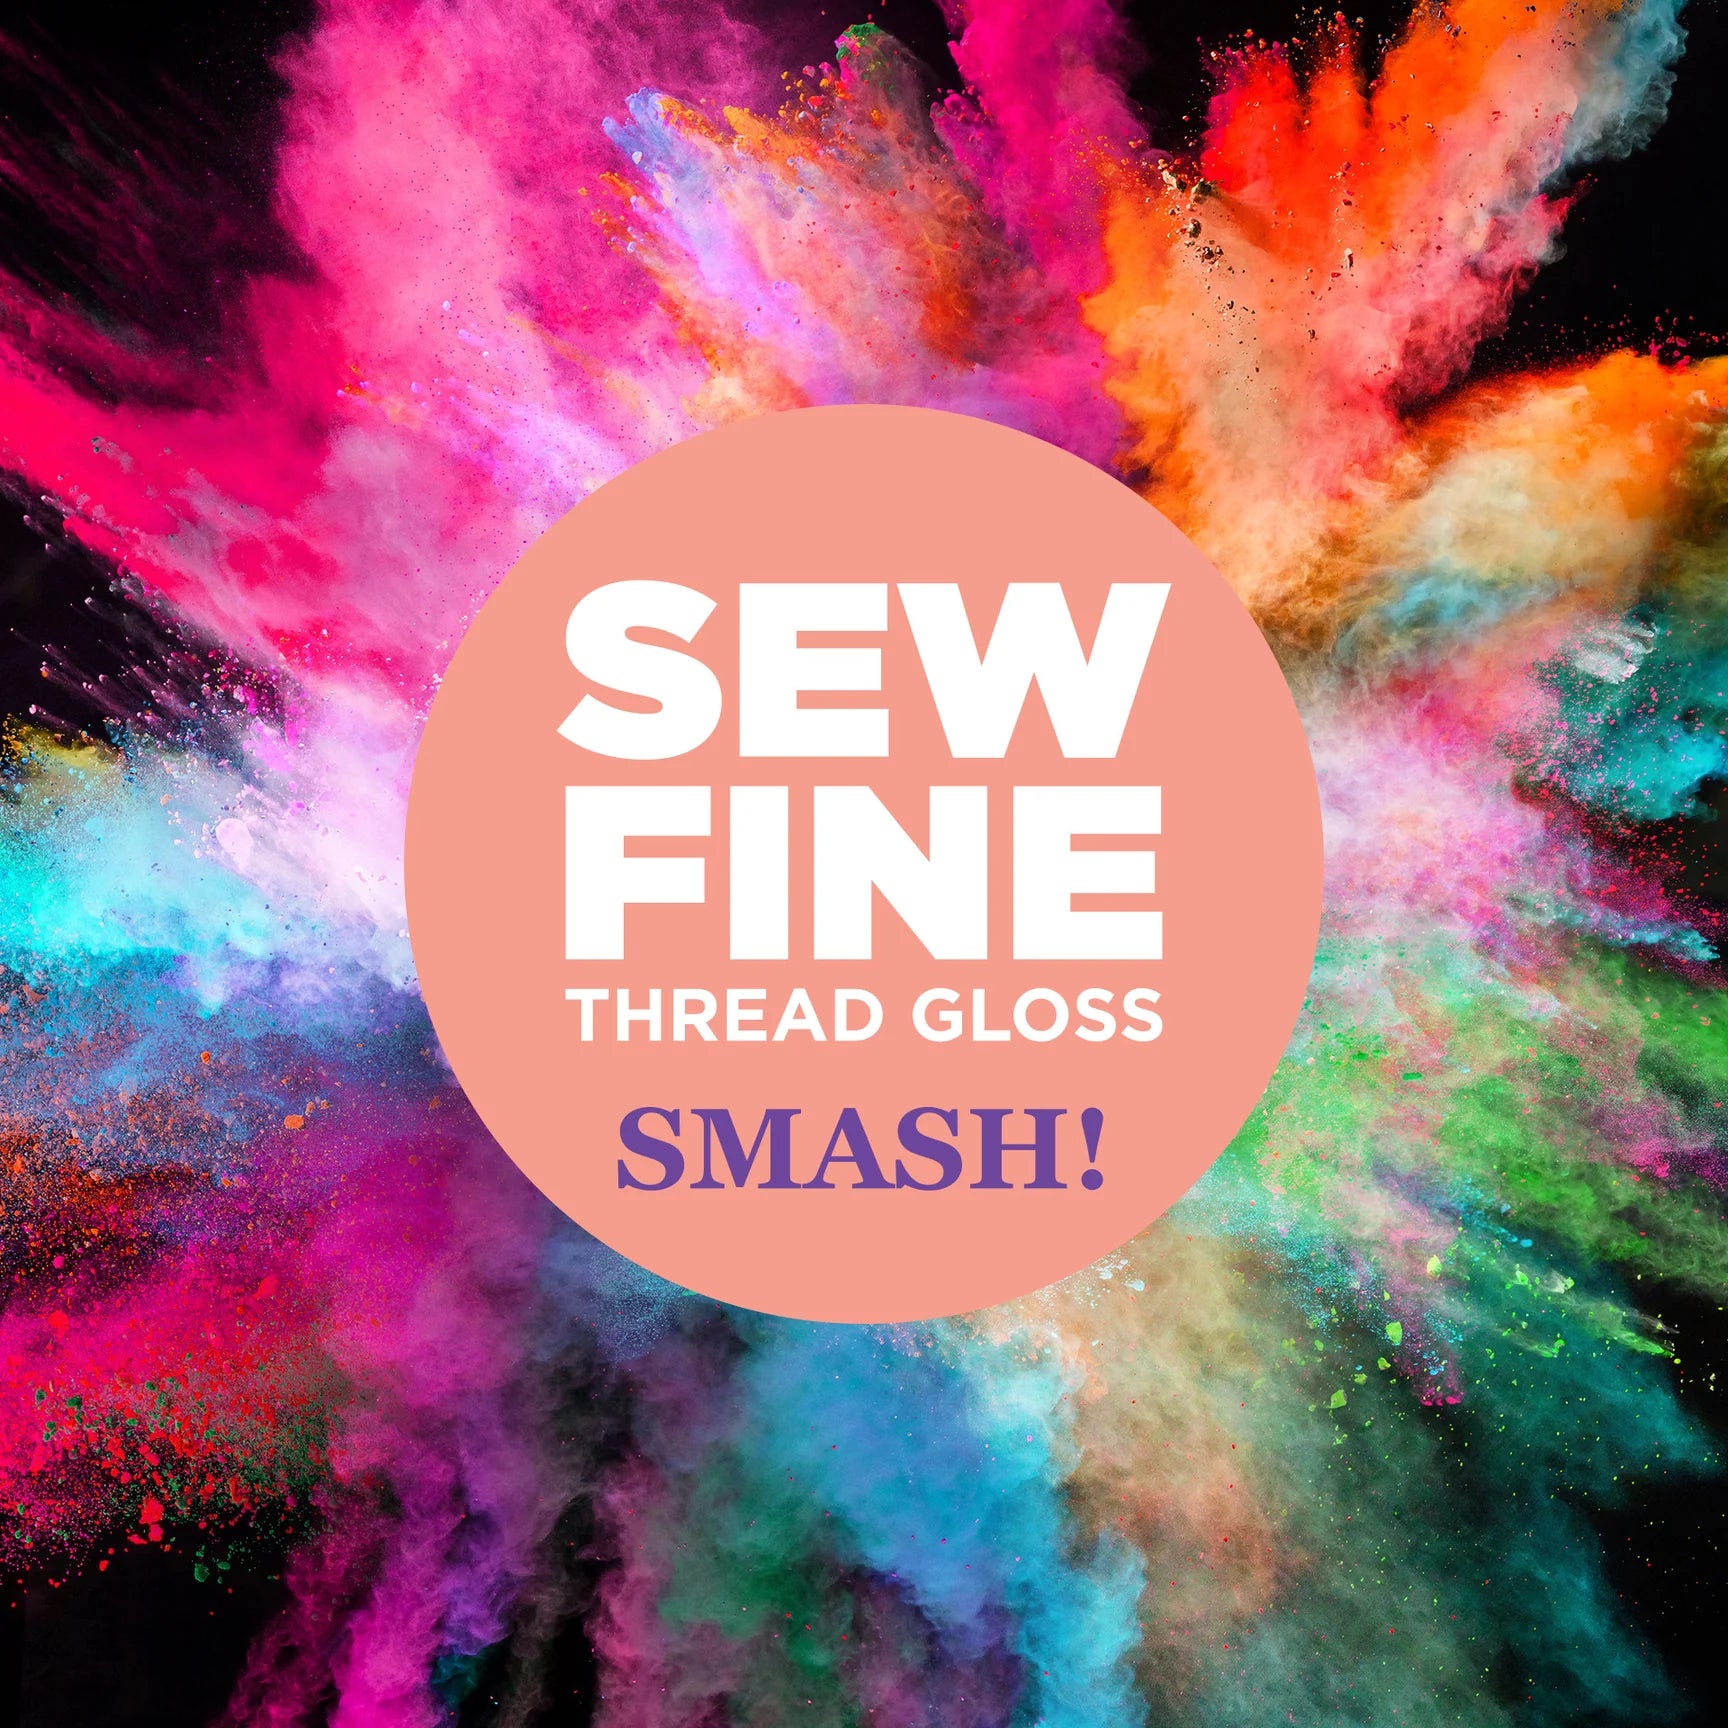 0.5oz pot of "SMASH!" Sew Fine Thread Gloss. A rainbow smash up of delicious treats, such as sugared strawberry, sweet peach, ripe raspberry and cotton candy. Fruity, fun and your new favourite thread gloss scent!